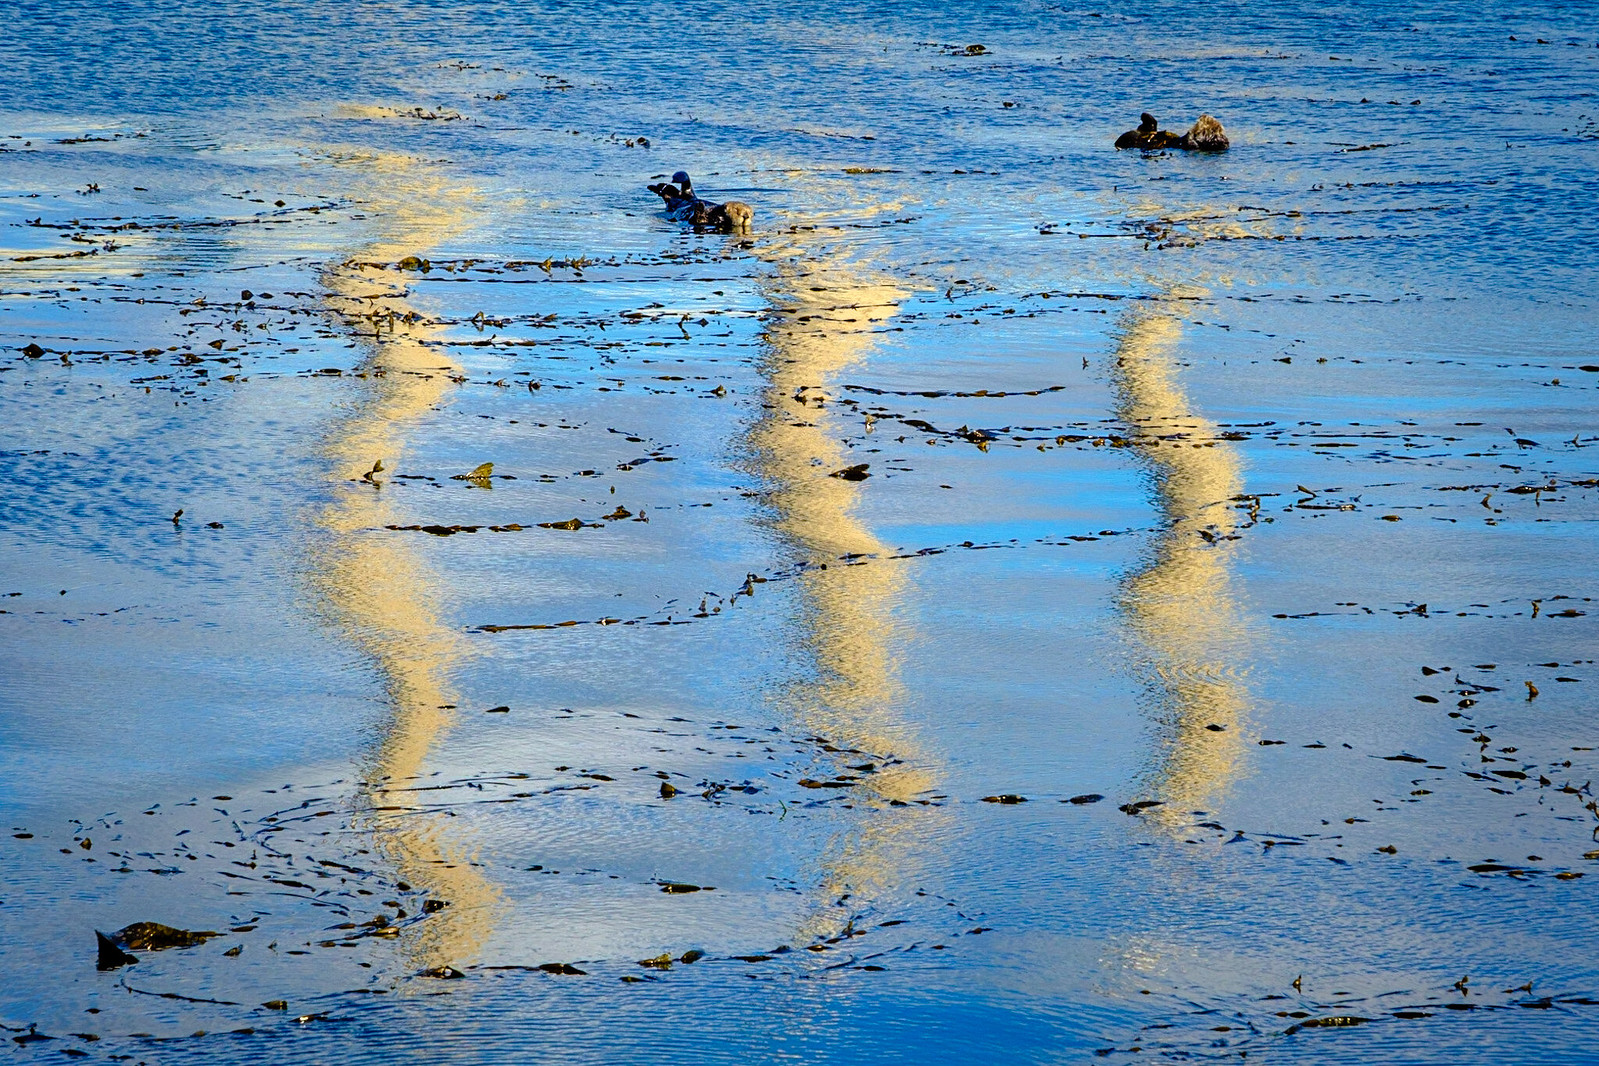 Sea otters with kelp lines, PGE smokestack reflections